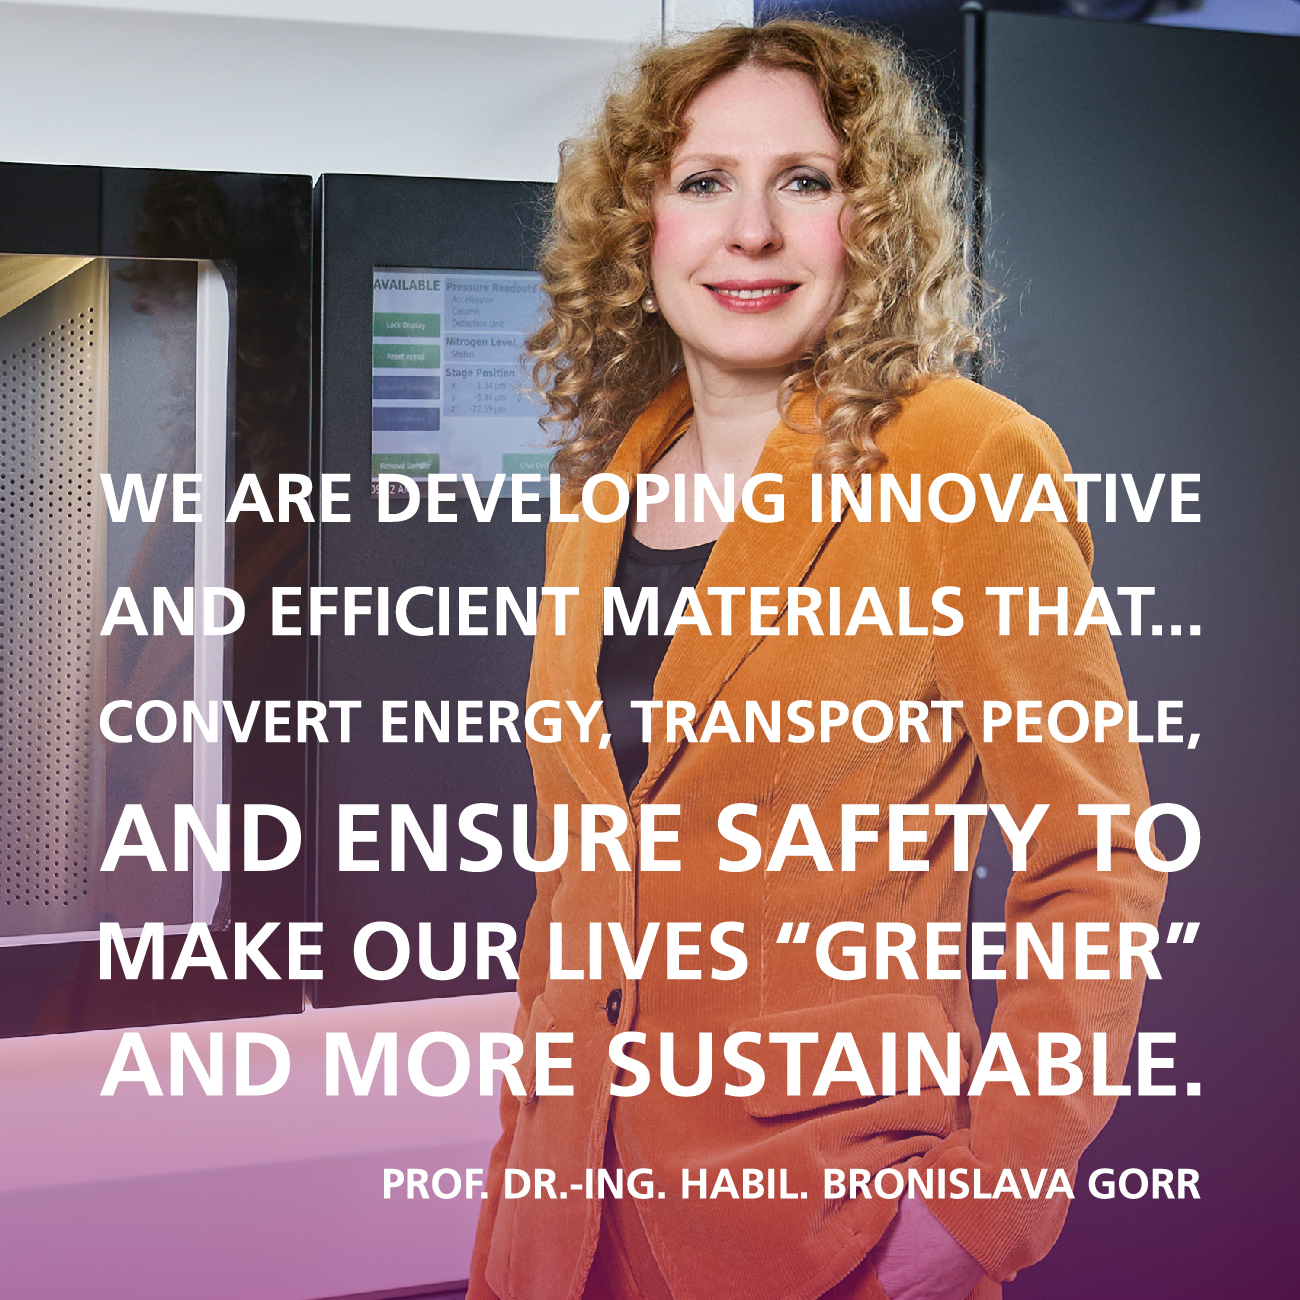 We are developing innovative and efficient materials that...convert energy, transport people, and ensure safety to make our lives “greener” and more sustainable. Quote by Prof. Dr.-Ing. habil. Bronislava Gorr, Division 3, KIT